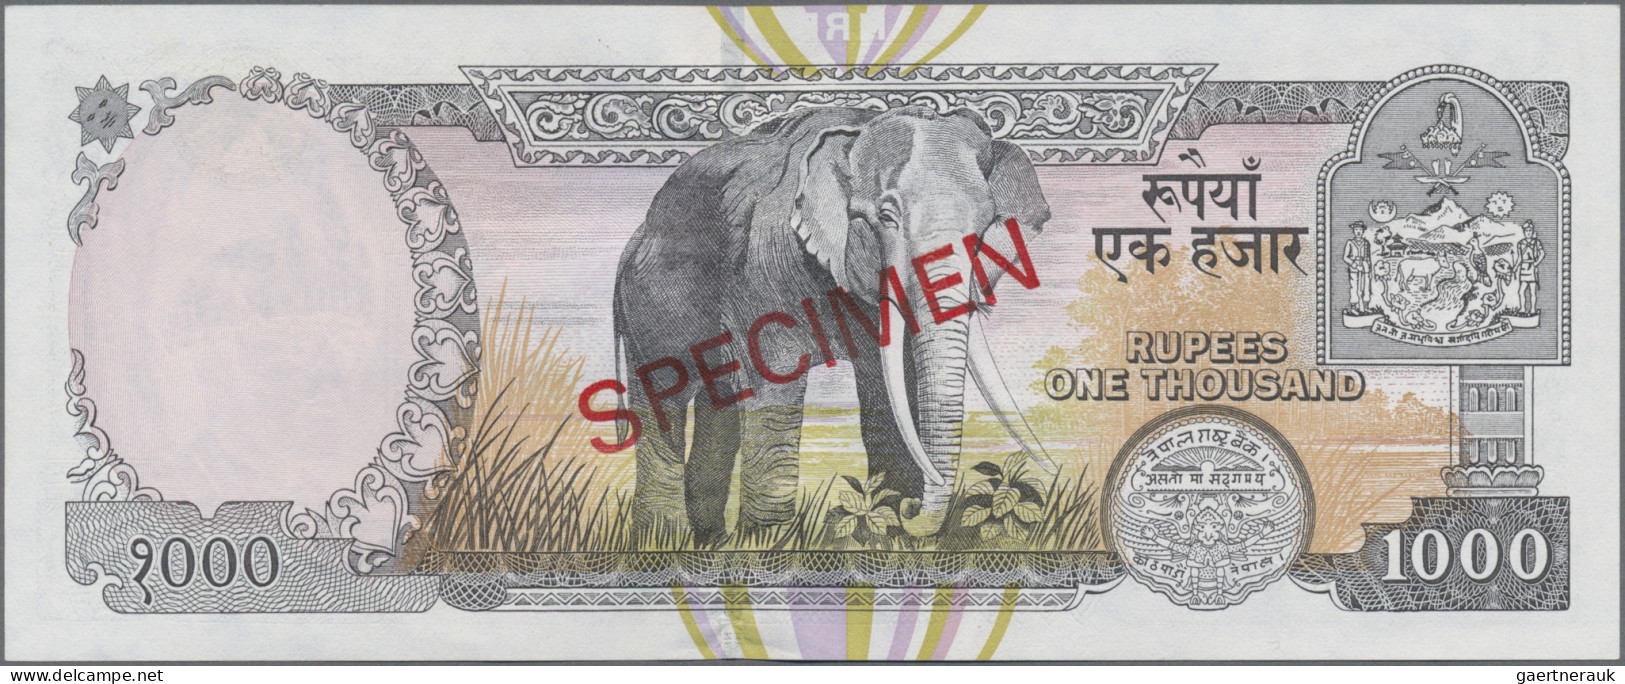 Nepal: Nepal Rastra Bank, 1.000 Rupees ND(2000) SPECIMEN, P.44as With Signature: - Nepal